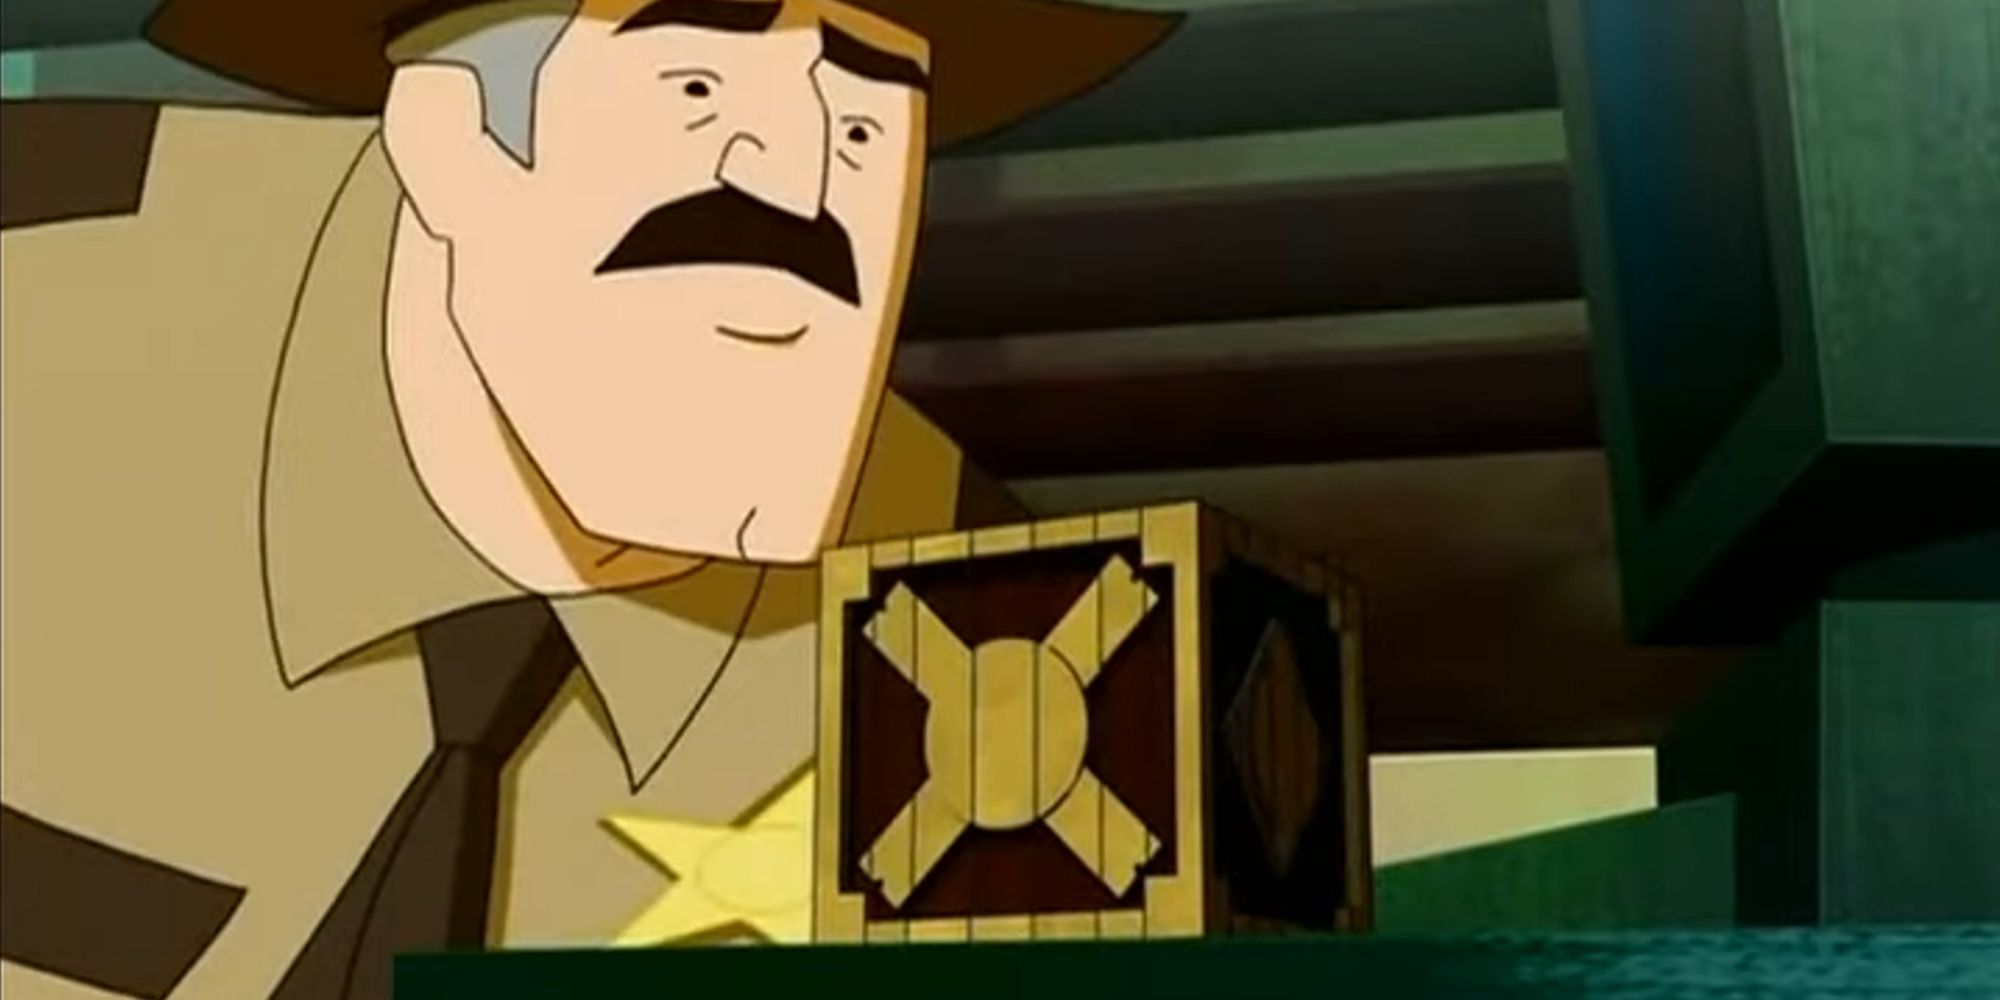 Sherriff Bronson Stone solving the puzzle box from Hellraiser in Scooby-Doo Mystery Incorporated